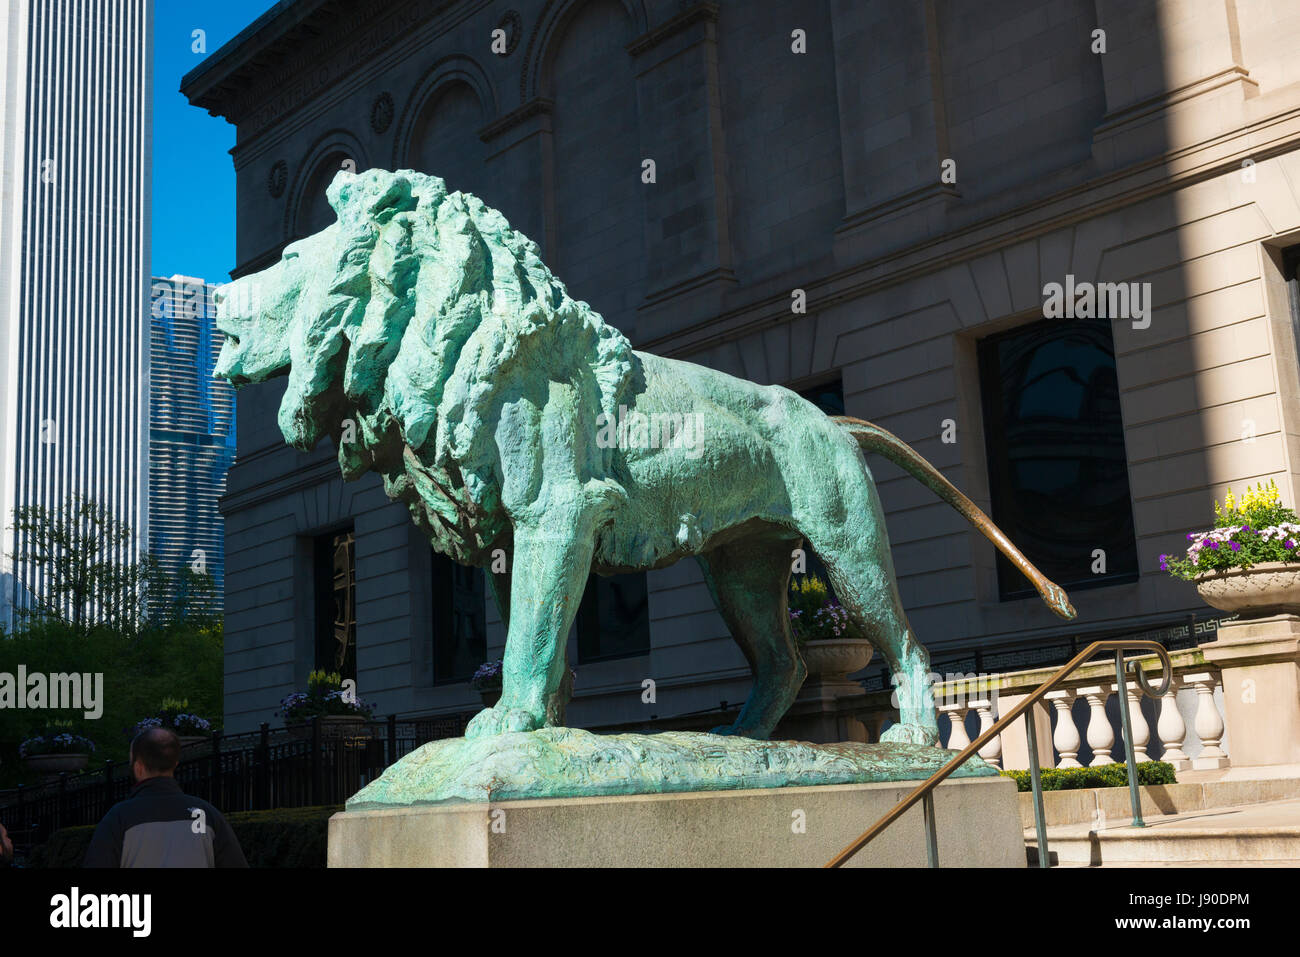 Chicago Illinois Michigan Avenue The Art Institute of Chicago detail main entrance statue sculpture art bronze lion by Edward Kemeys 1893 On the Prowl Stock Photo